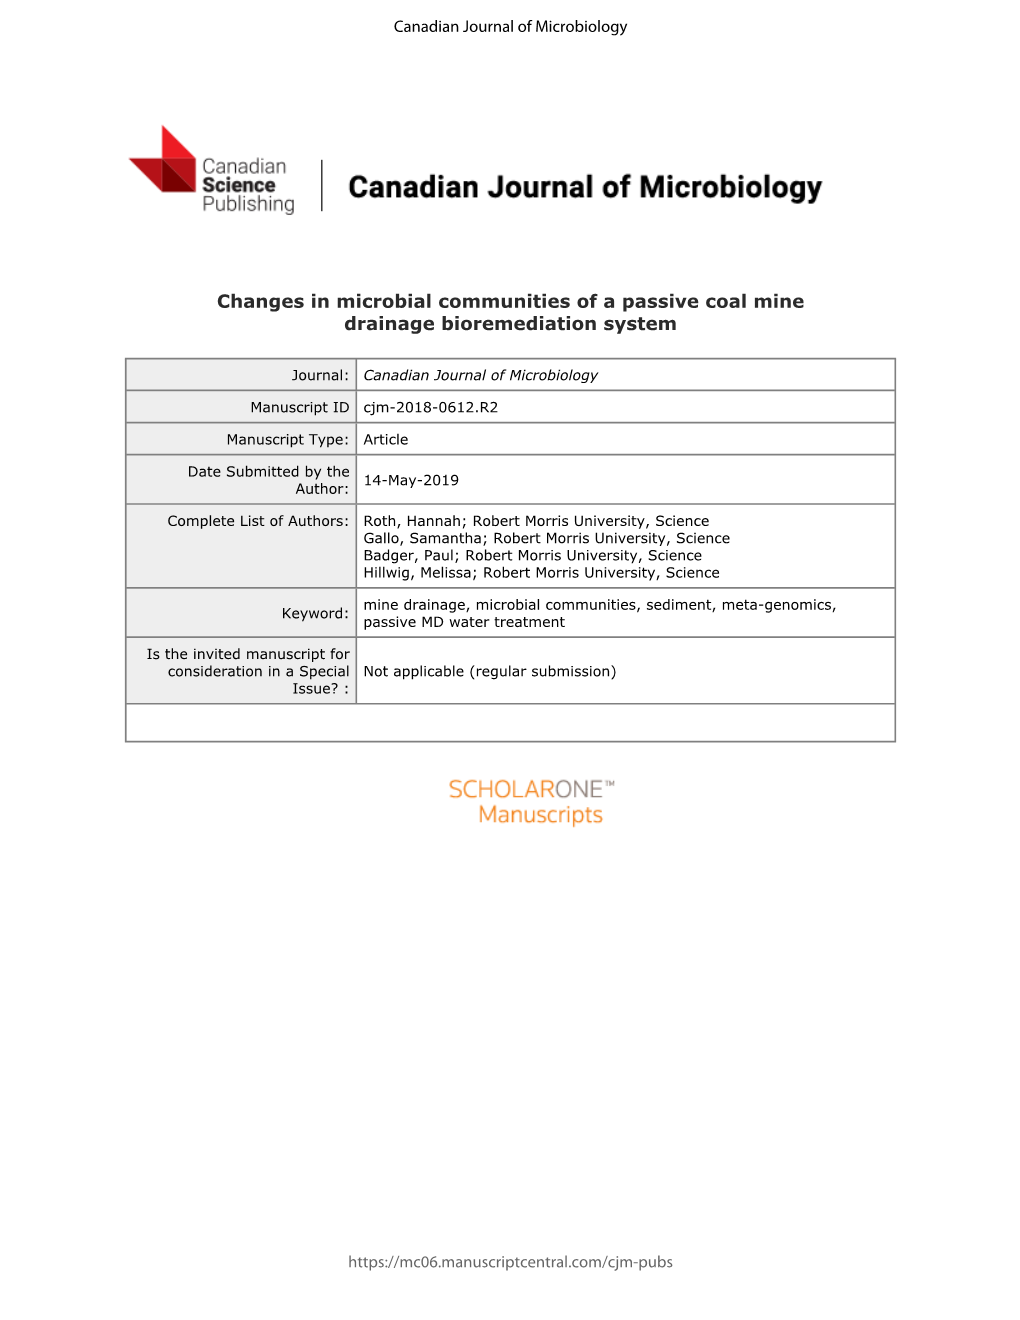 Changes in Microbial Communities of a Passive Coal Mine Drainage Bioremediation System